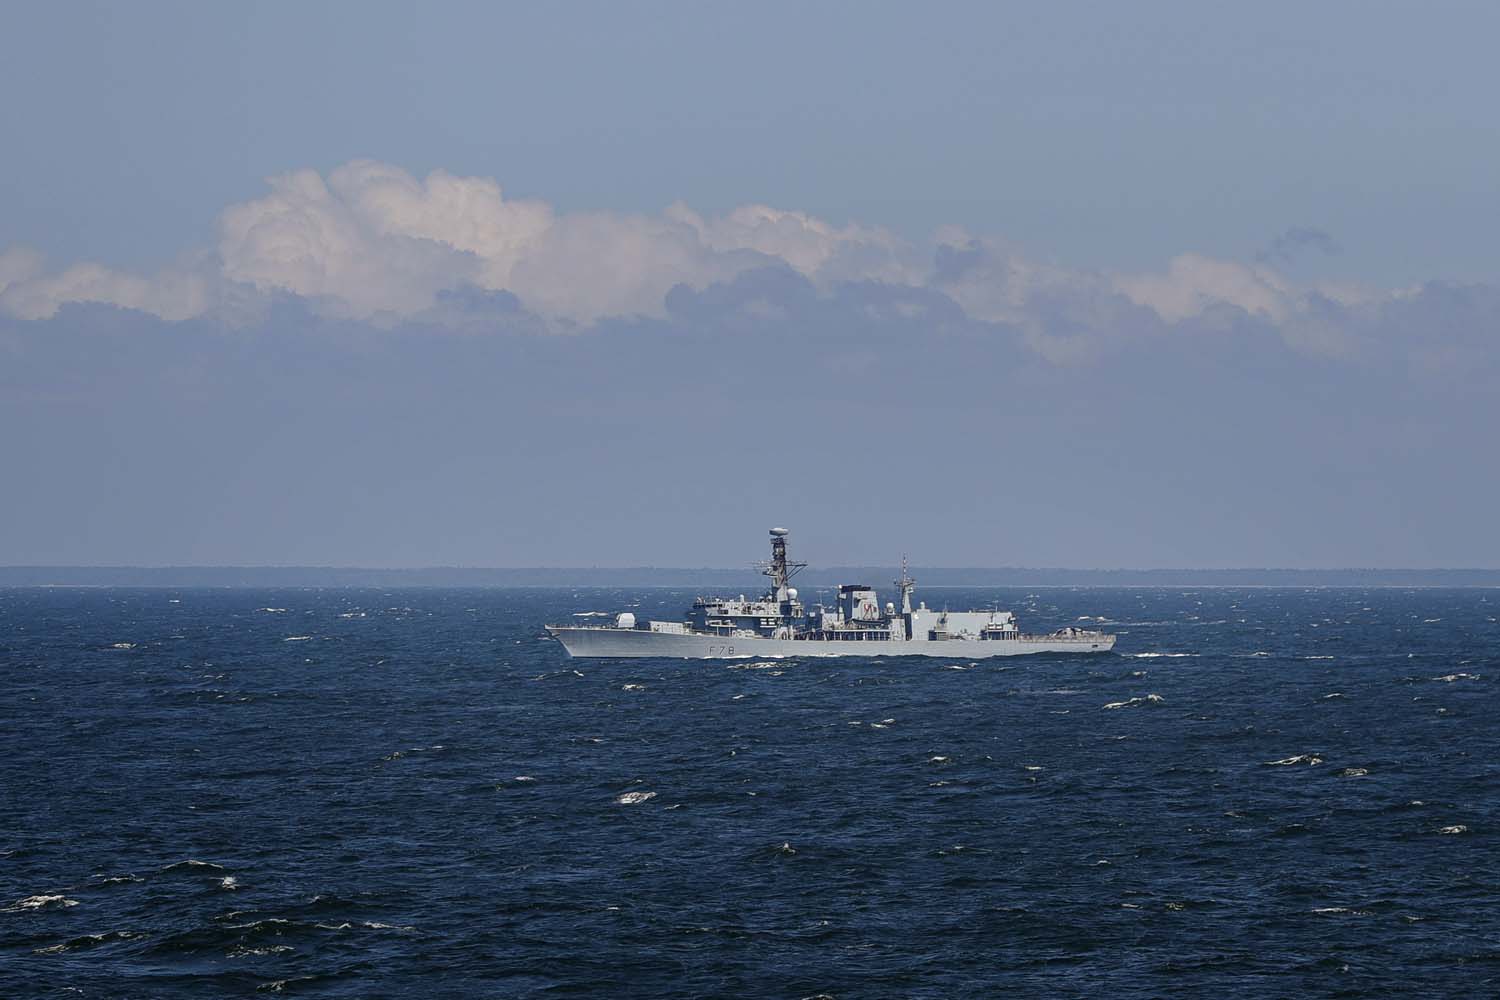 HMS Kent has been shadowing seven Russian ships alongside eight other Royal Navy vessels in UK waters